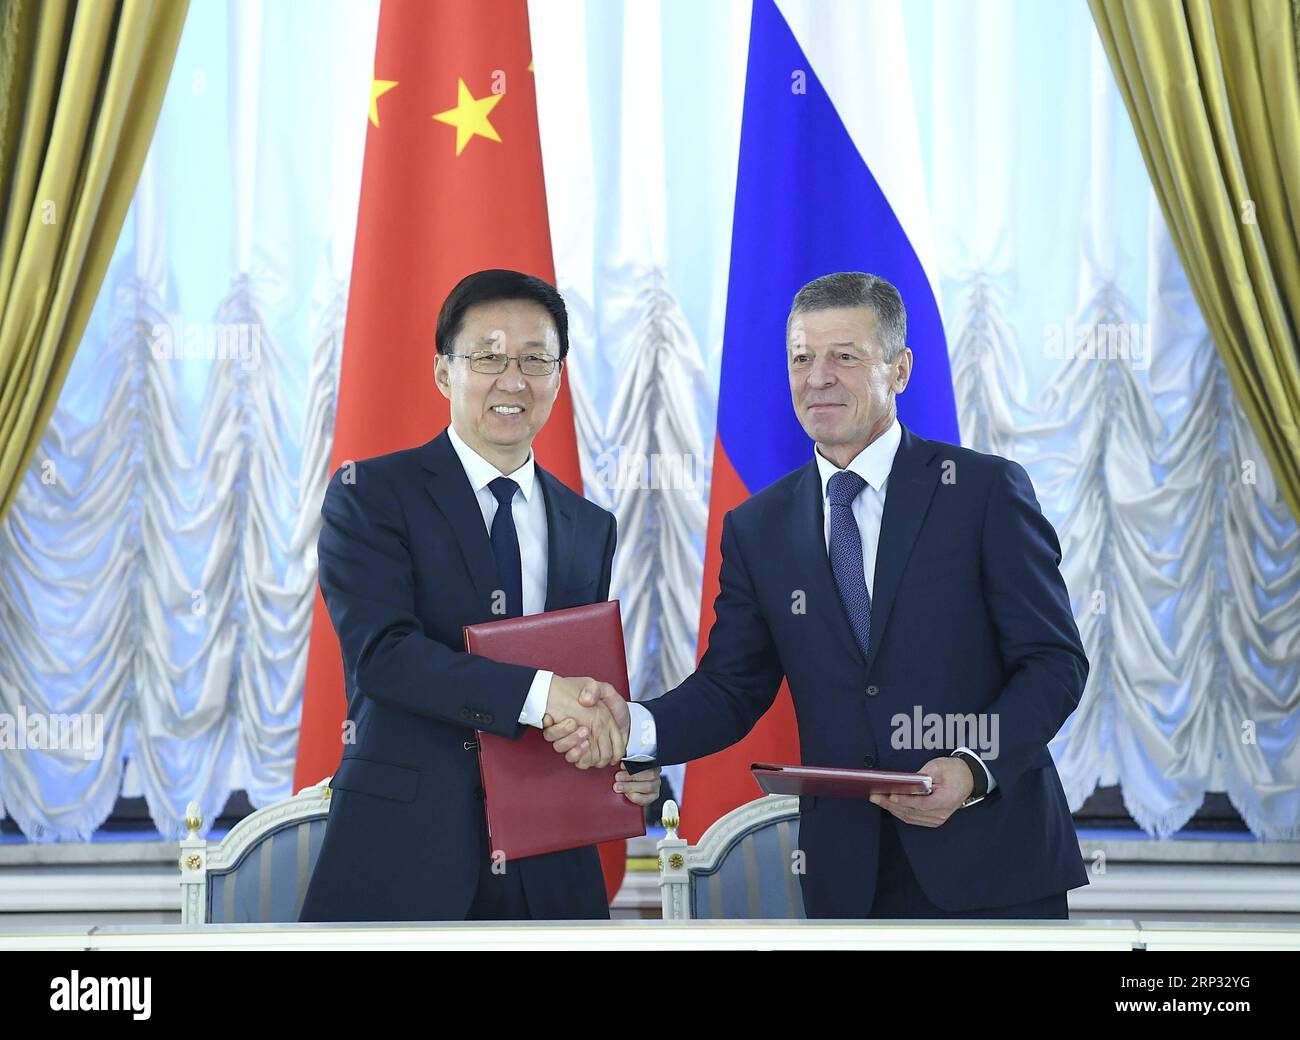 (180918) -- MOSCOW, Sept. 18, 2018 -- Chinese Vice Premier Han Zheng (L), also a member of the Standing Committee of the Political Bureau of the Communist Party of China (CPC) Central Committee, and Russian Deputy Prime Minister Dmitry Kozak sign the summary of minutes of the 15th meeting of the China-Russia Energy Cooperation Committee in Moscow, Russia, Sept. 17, 2018. Han met with Kozak in Moscow on Monday and co-chaired the meeting with him. )(mcg) RUSSIA-CHINA-HAN ZHENG-DMITRY KOZAK-MEETING YanxYan PUBLICATIONxNOTxINxCHN Stock Photo